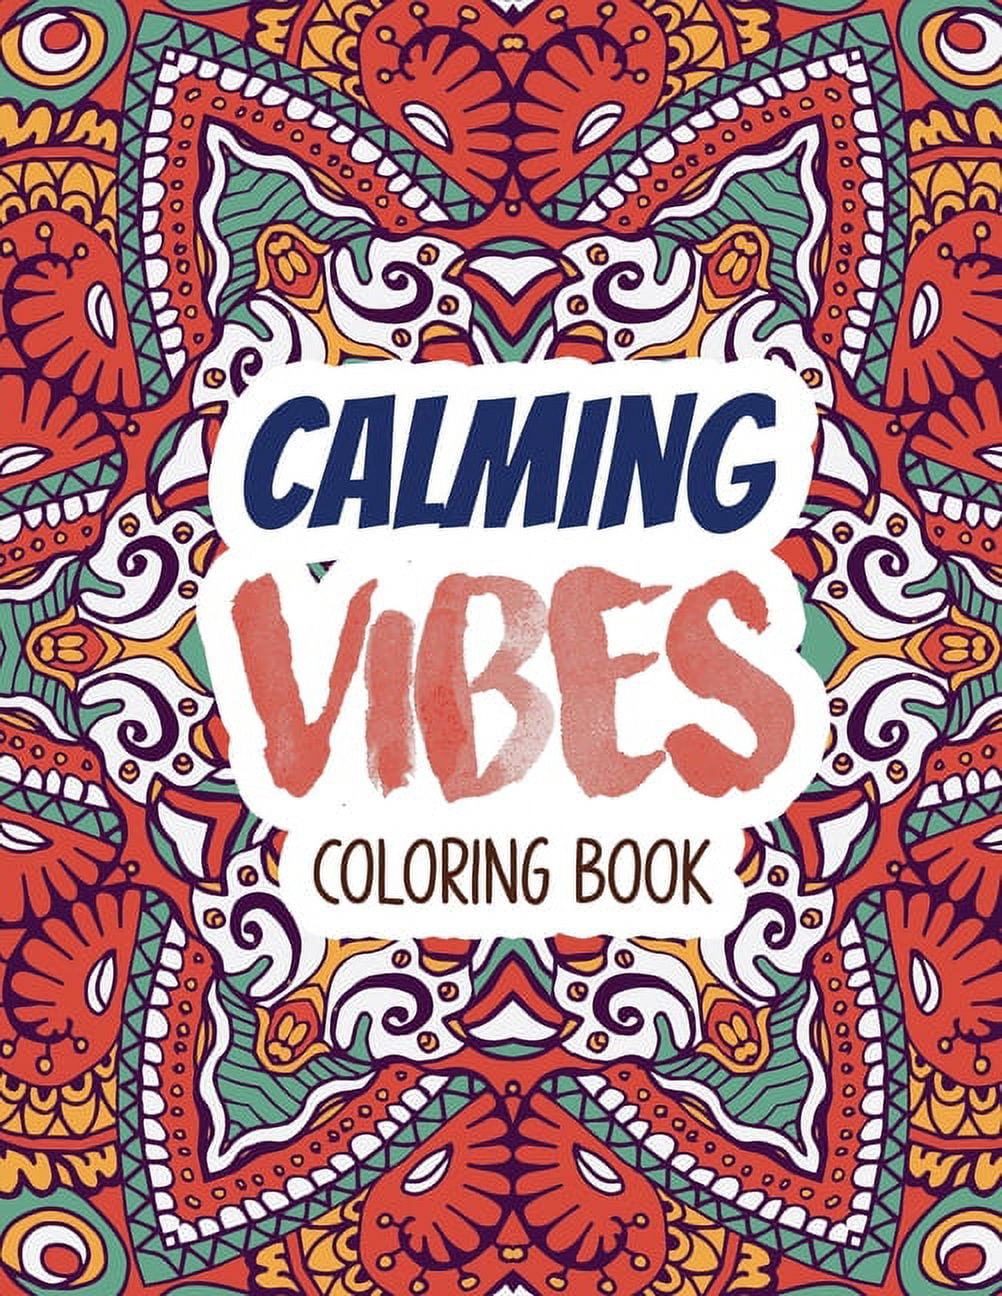 Calming Vibes Coloring Book: Depression Coloring Book for Getting Through Tough Times, Adult Coloring and Stress Relief Book, Christmas Gift Idea. [Book]